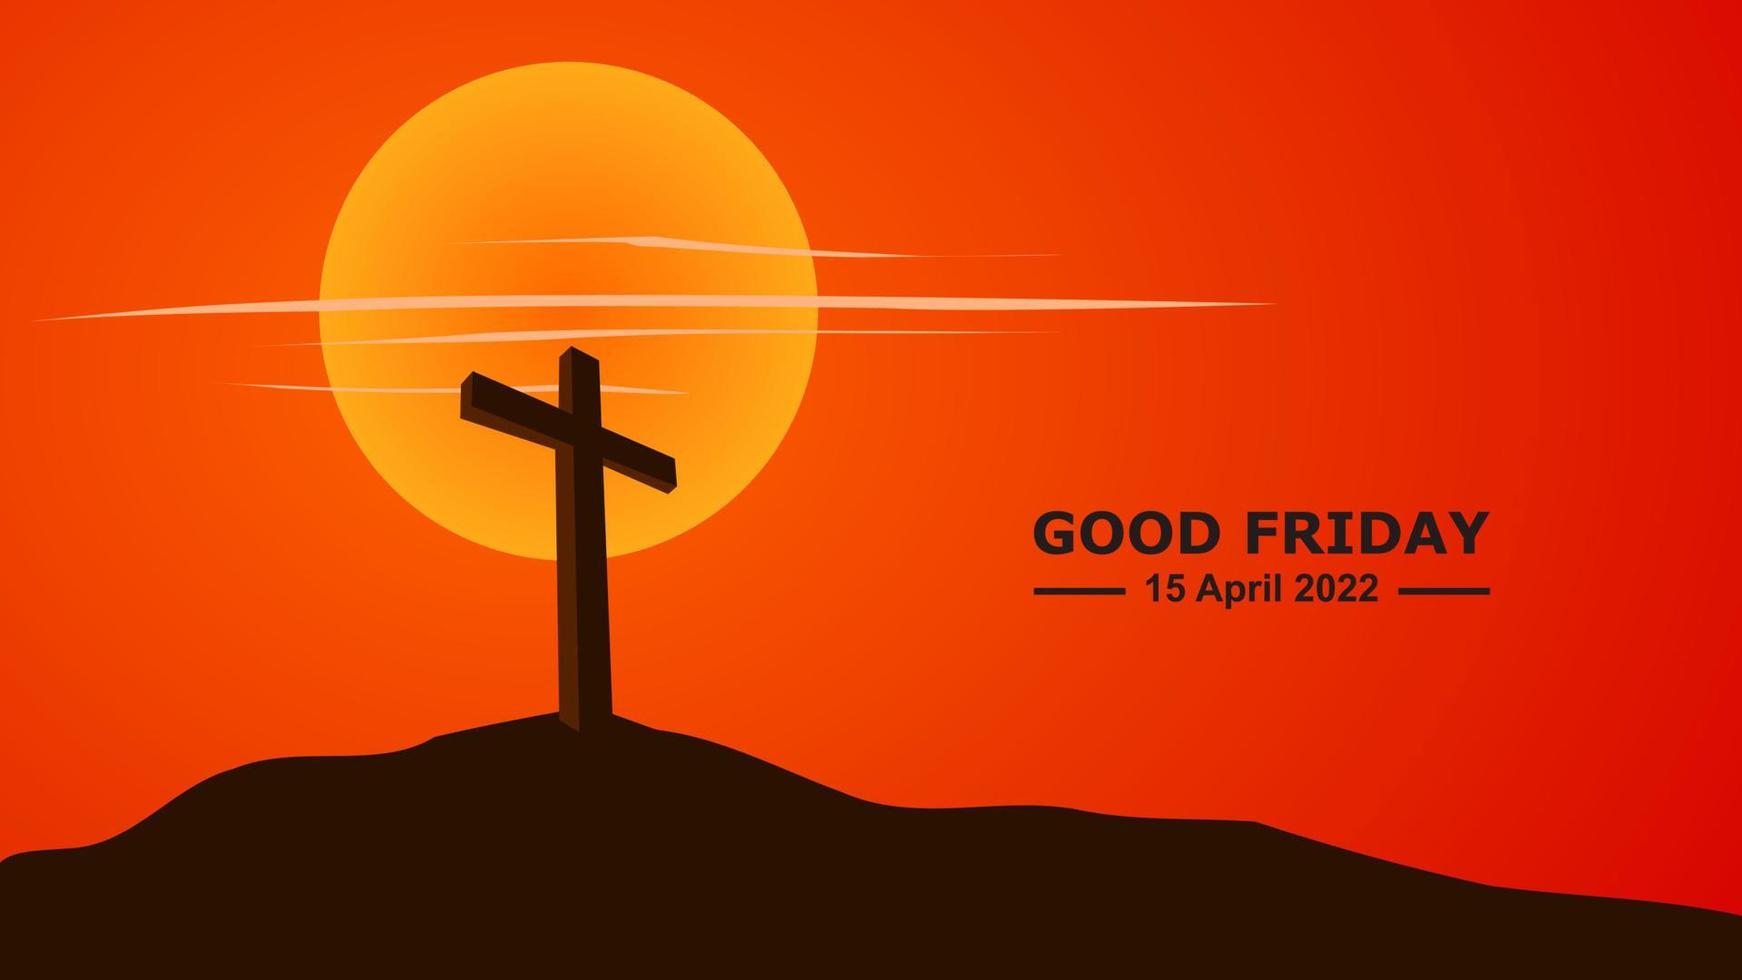 Good Friday. Crucifixion Of Jesus Christ illustration. Cross at sunset. You can use this asset for background your content like as Worship, Card, Banner, Live Streaming, Presentation, Webinar anymore. vector